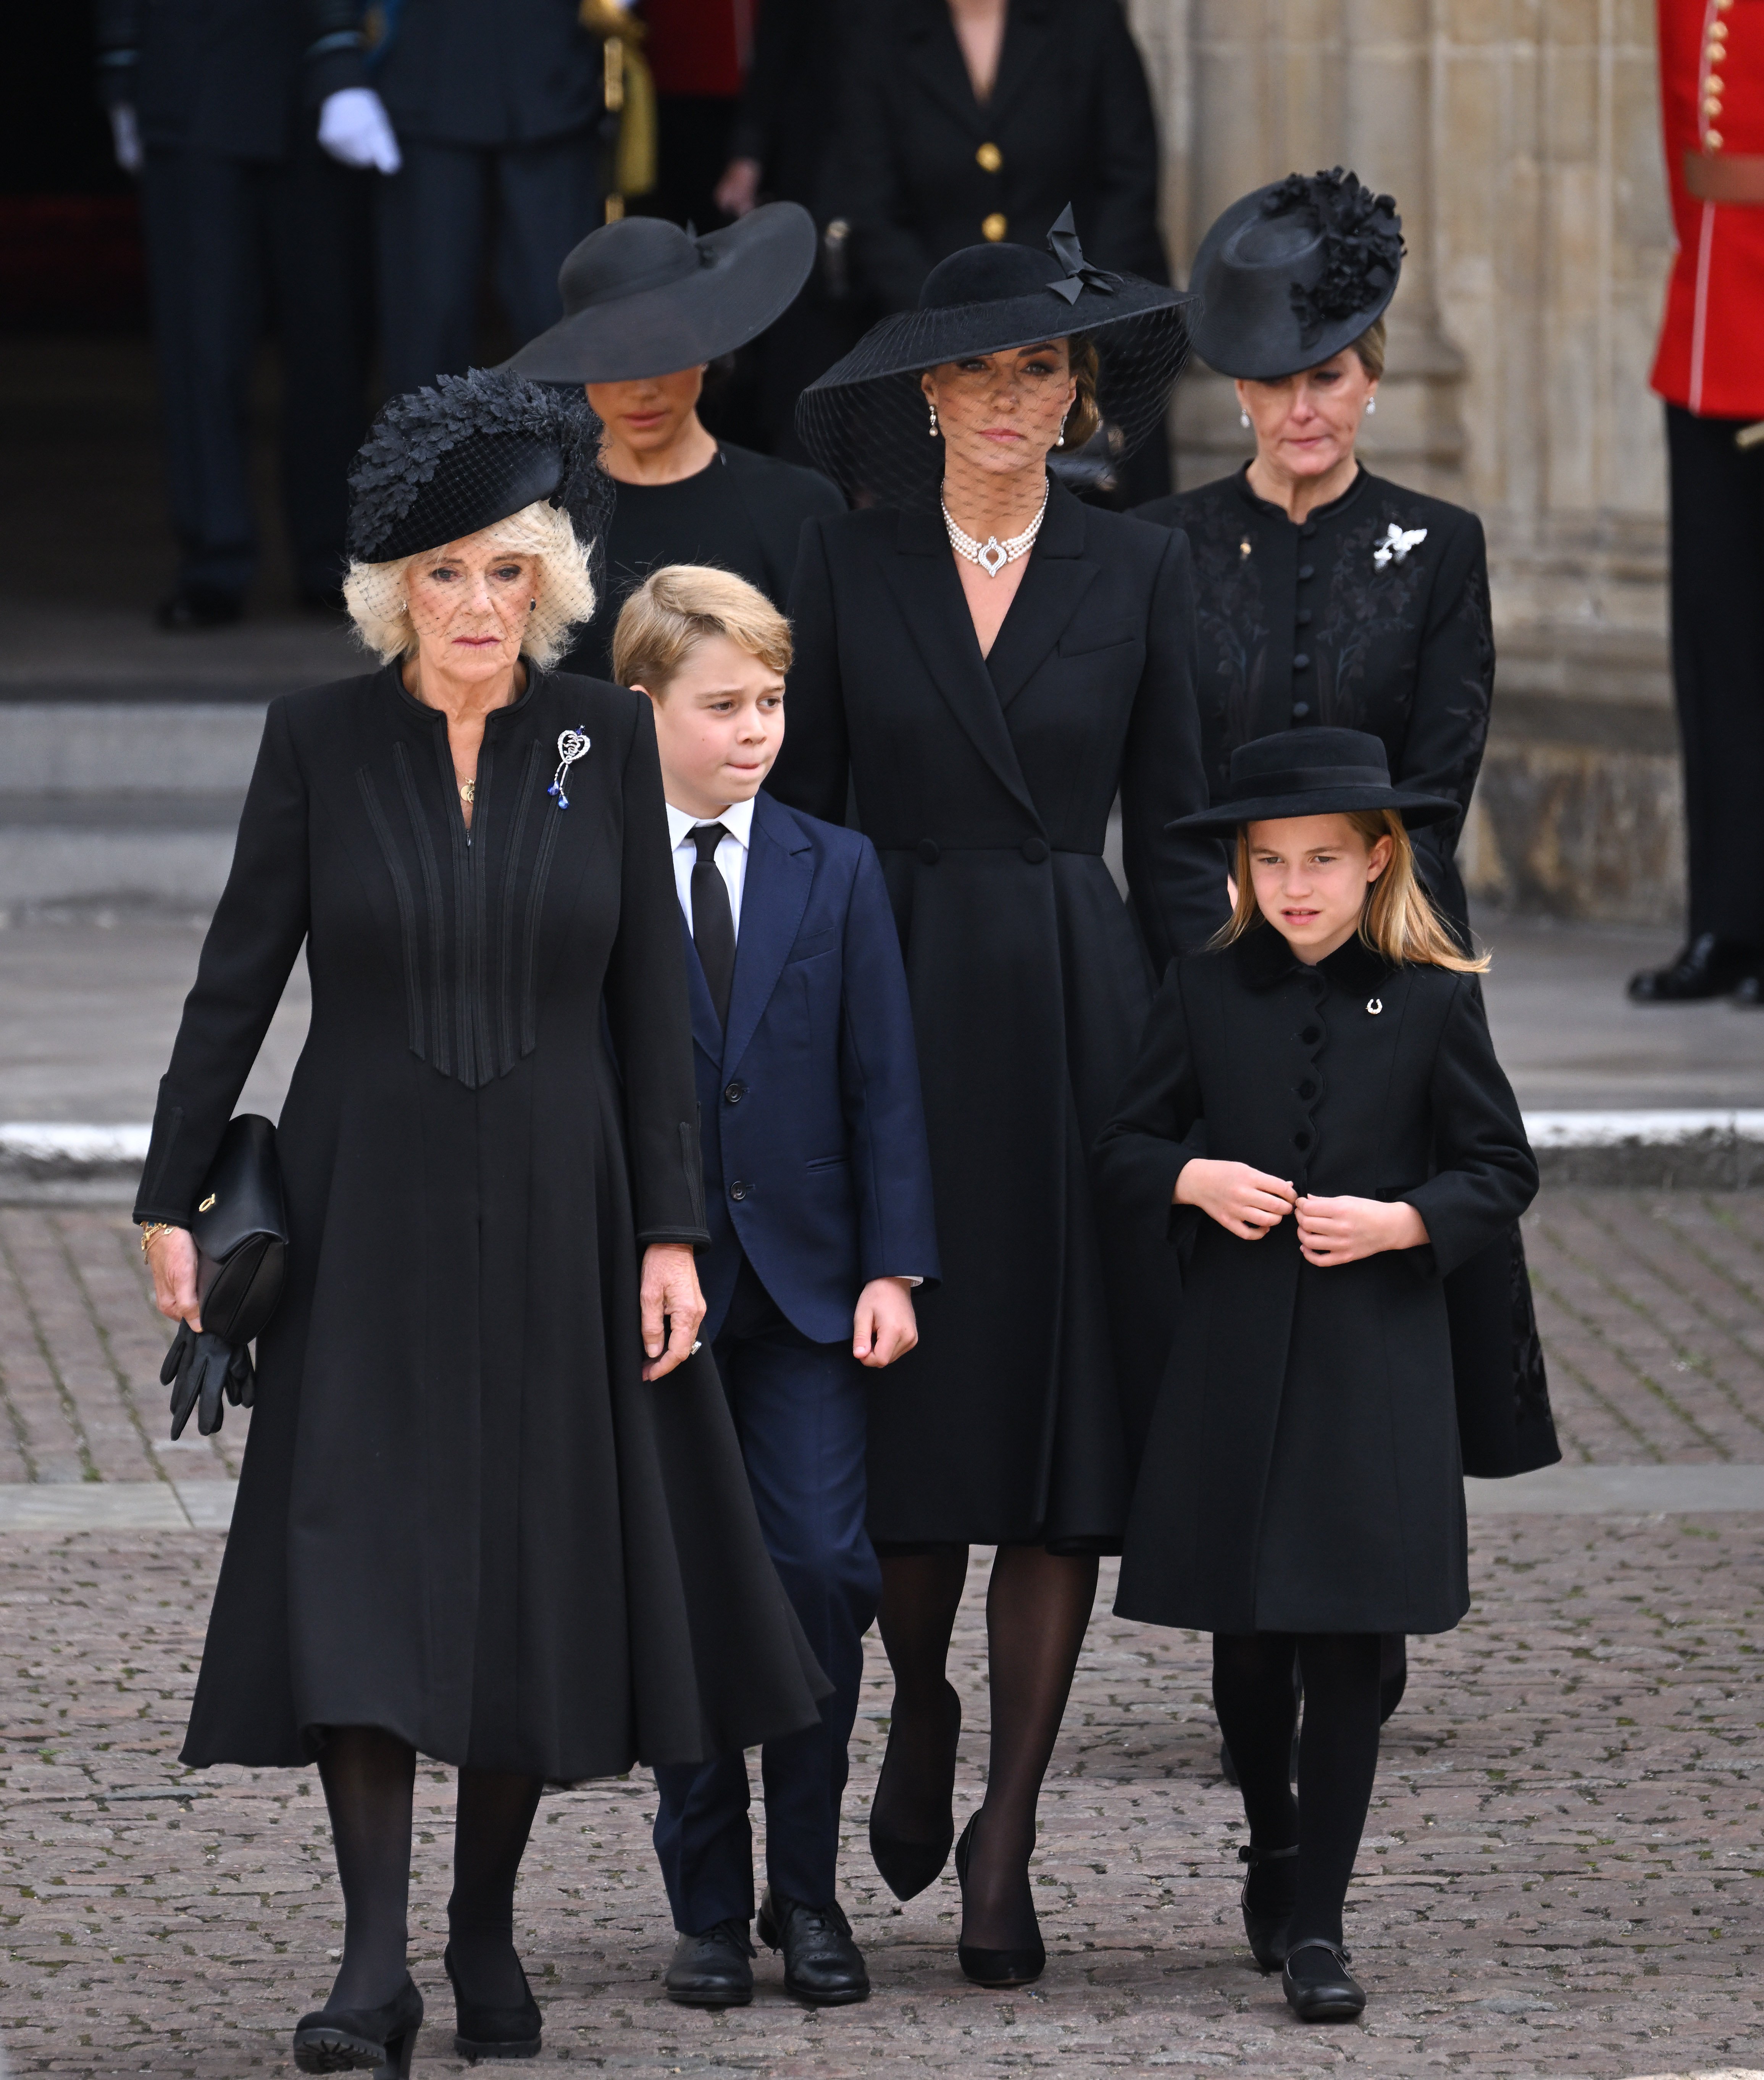 Camilla, Queen Consort, Meghan, Duchess of Sussex, Prince George of Wales, Catherine, Princess of Wales, Princess Charlotte of Wales and Sophie, Countess of Wessex during the State Funeral of Queen Elizabeth II at Westminster Abbey on September 19, 2022 in London, England | Source: Getty Images